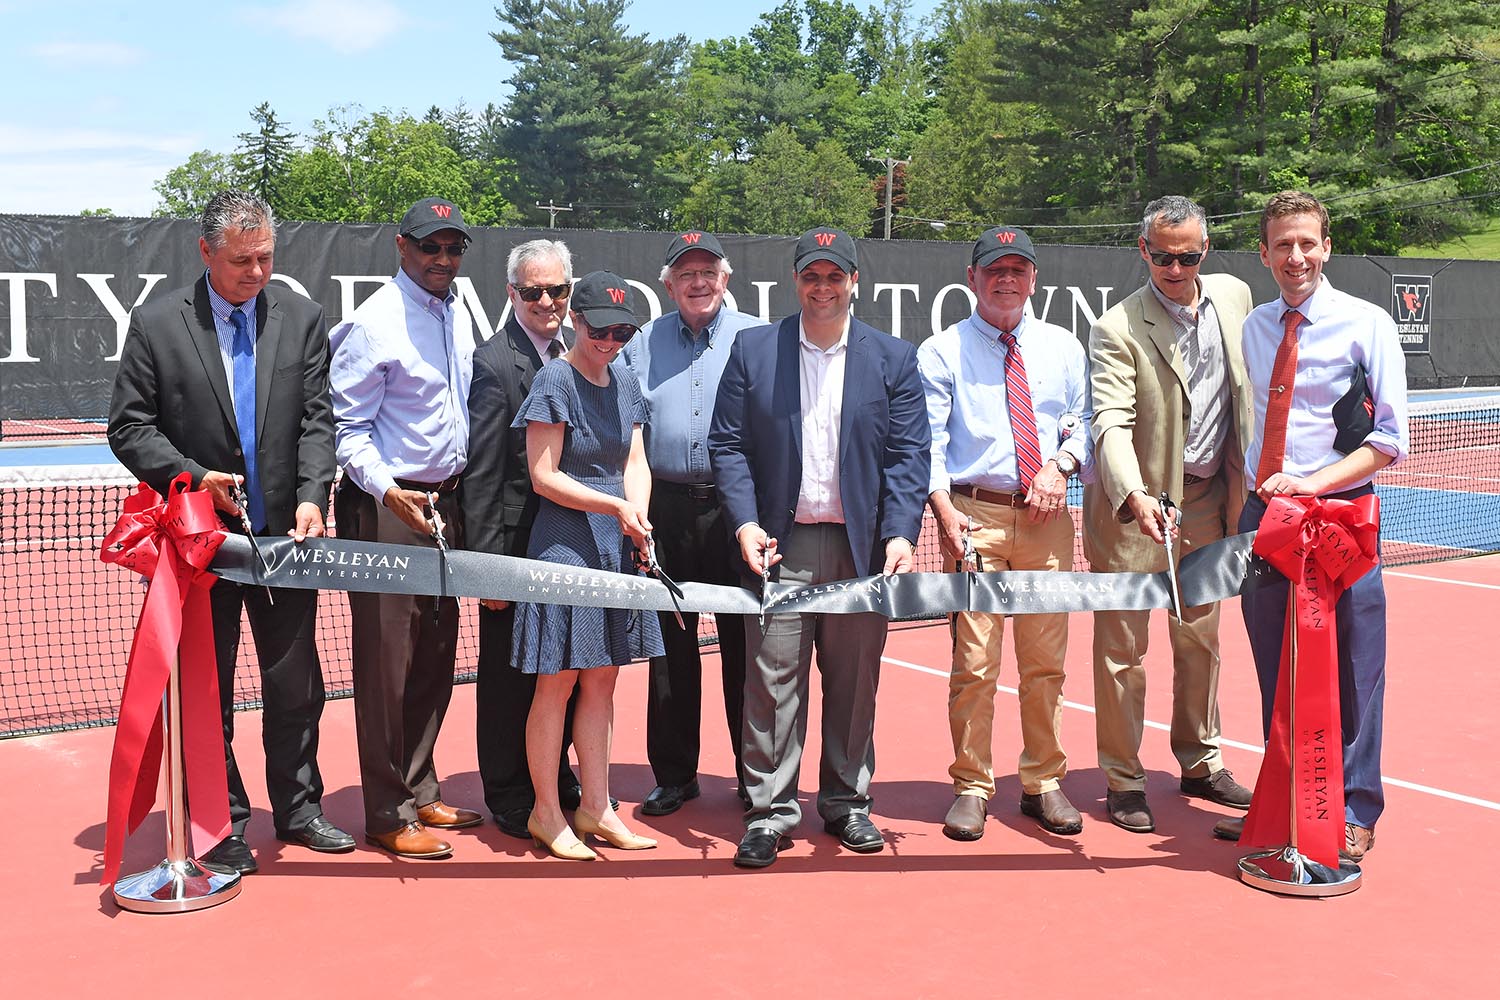 In 2017, Wesleyan and the City of Middletown partnered together on a project to rehabilitate and upgrade the Vine Street Tennis Courts. And on June 8, the courts were officially re-dedicated during a ribbon-cutting ceremony. Participants included William Russo, director of Middletown Public Works; Lorenzo Marshall, Middlesex Chamber of Commerce; Seb Giuliano, Common Council; Cathy Lechowicz, director of recreation and community services for the City of Middletown; Gerald Daley, Common Council; Daniel Drew, Mayor; Eugene Nocera, Common Council' Wesleyan President Michael Roth and State Representative Matt Lesser ’10. 